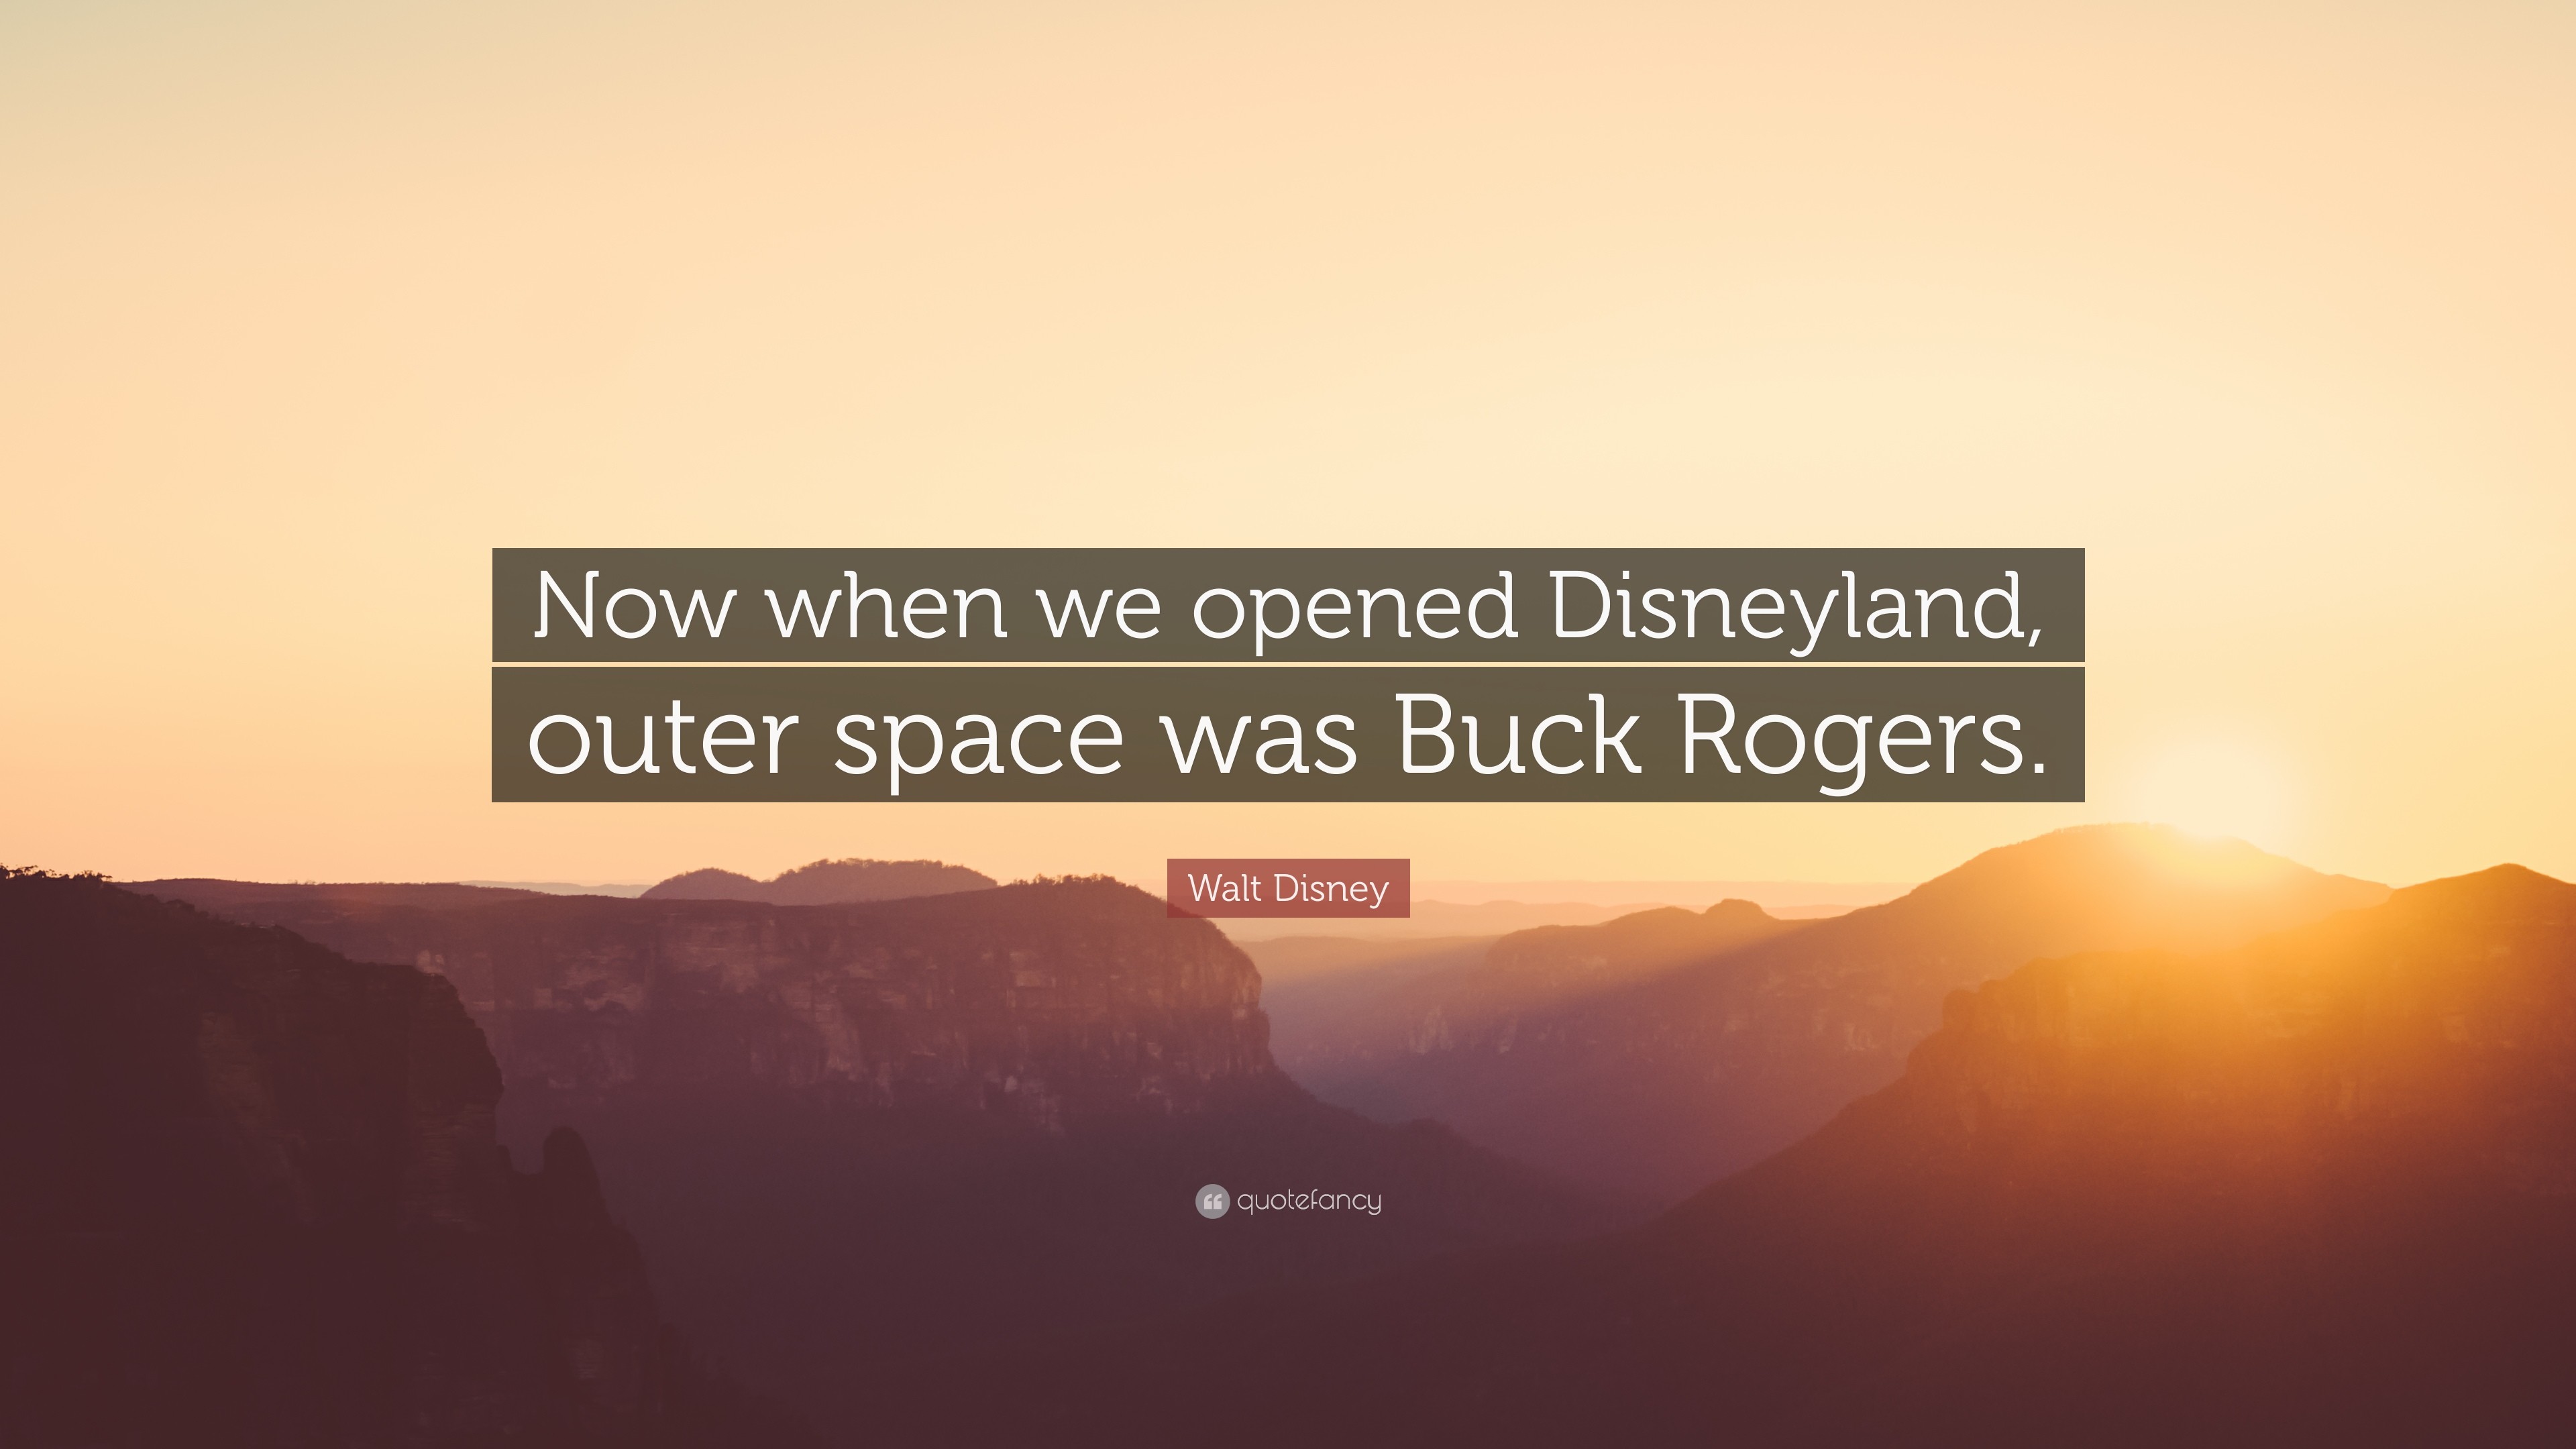 Walt Disney Quote Now when we opened Disneyland, outer space was Buck Rogers